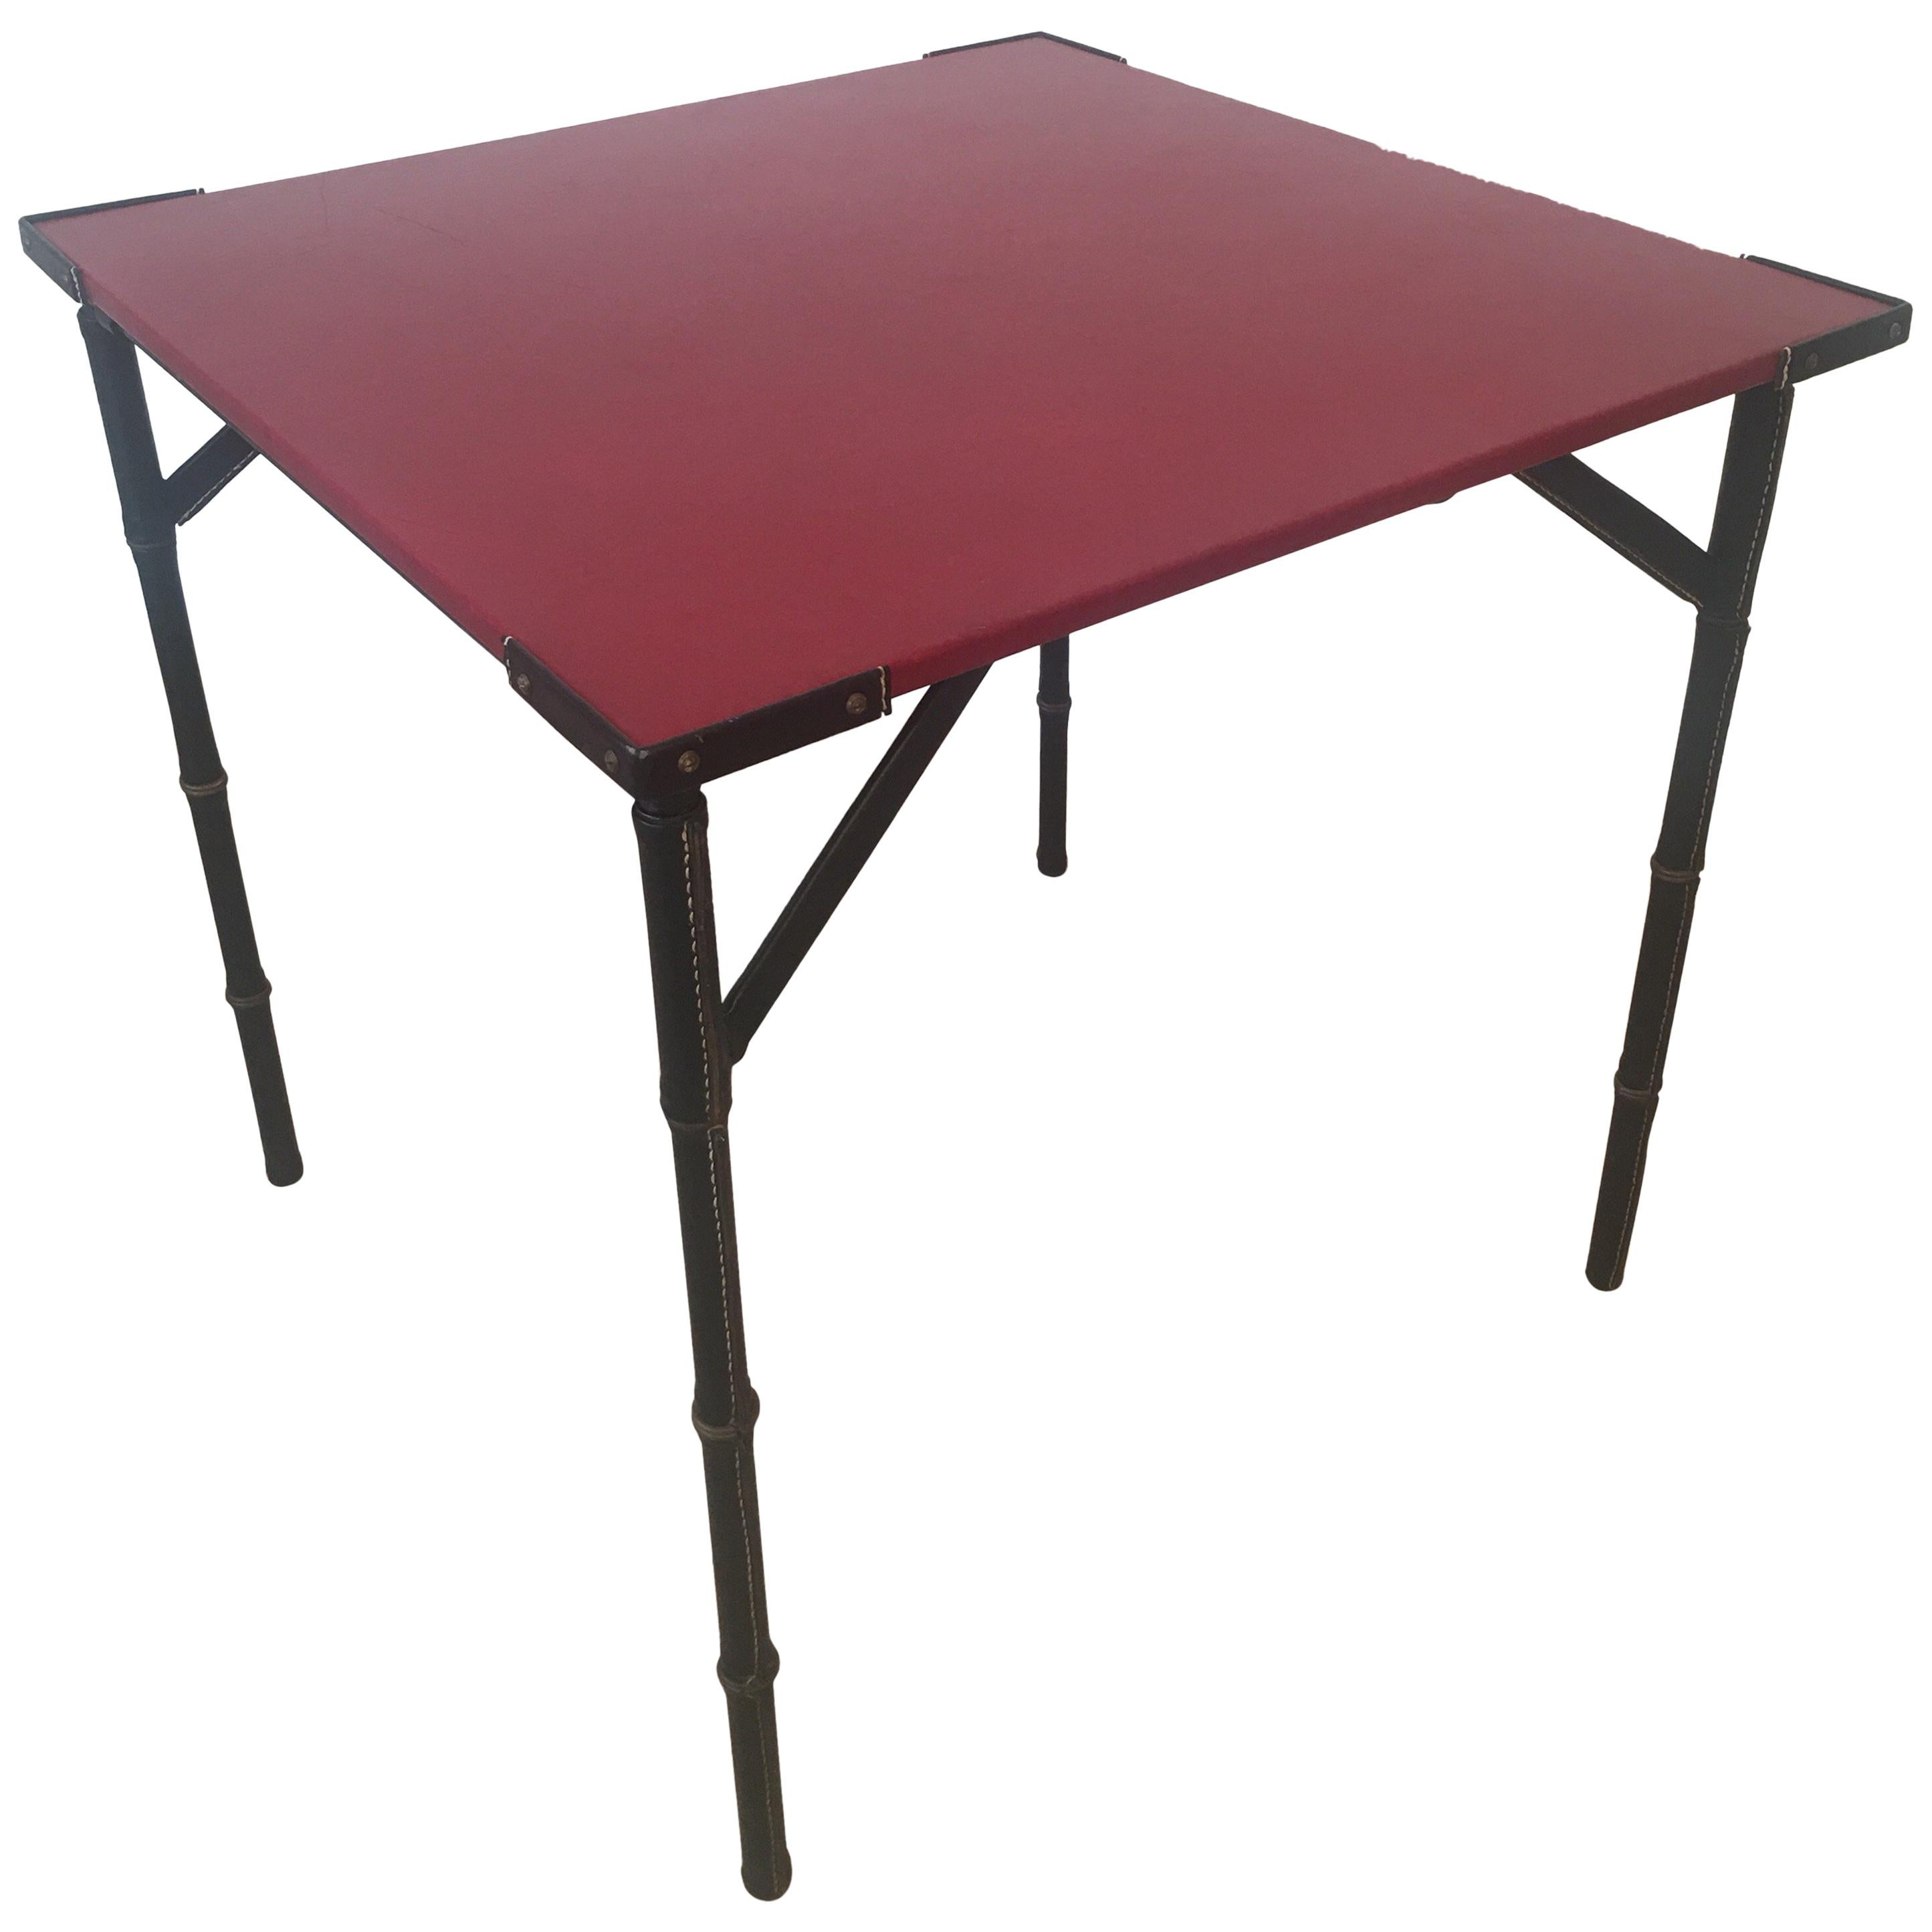 Jacques Adnet Red Leather Top and Black Leather Folding Square Table, 1950s For Sale